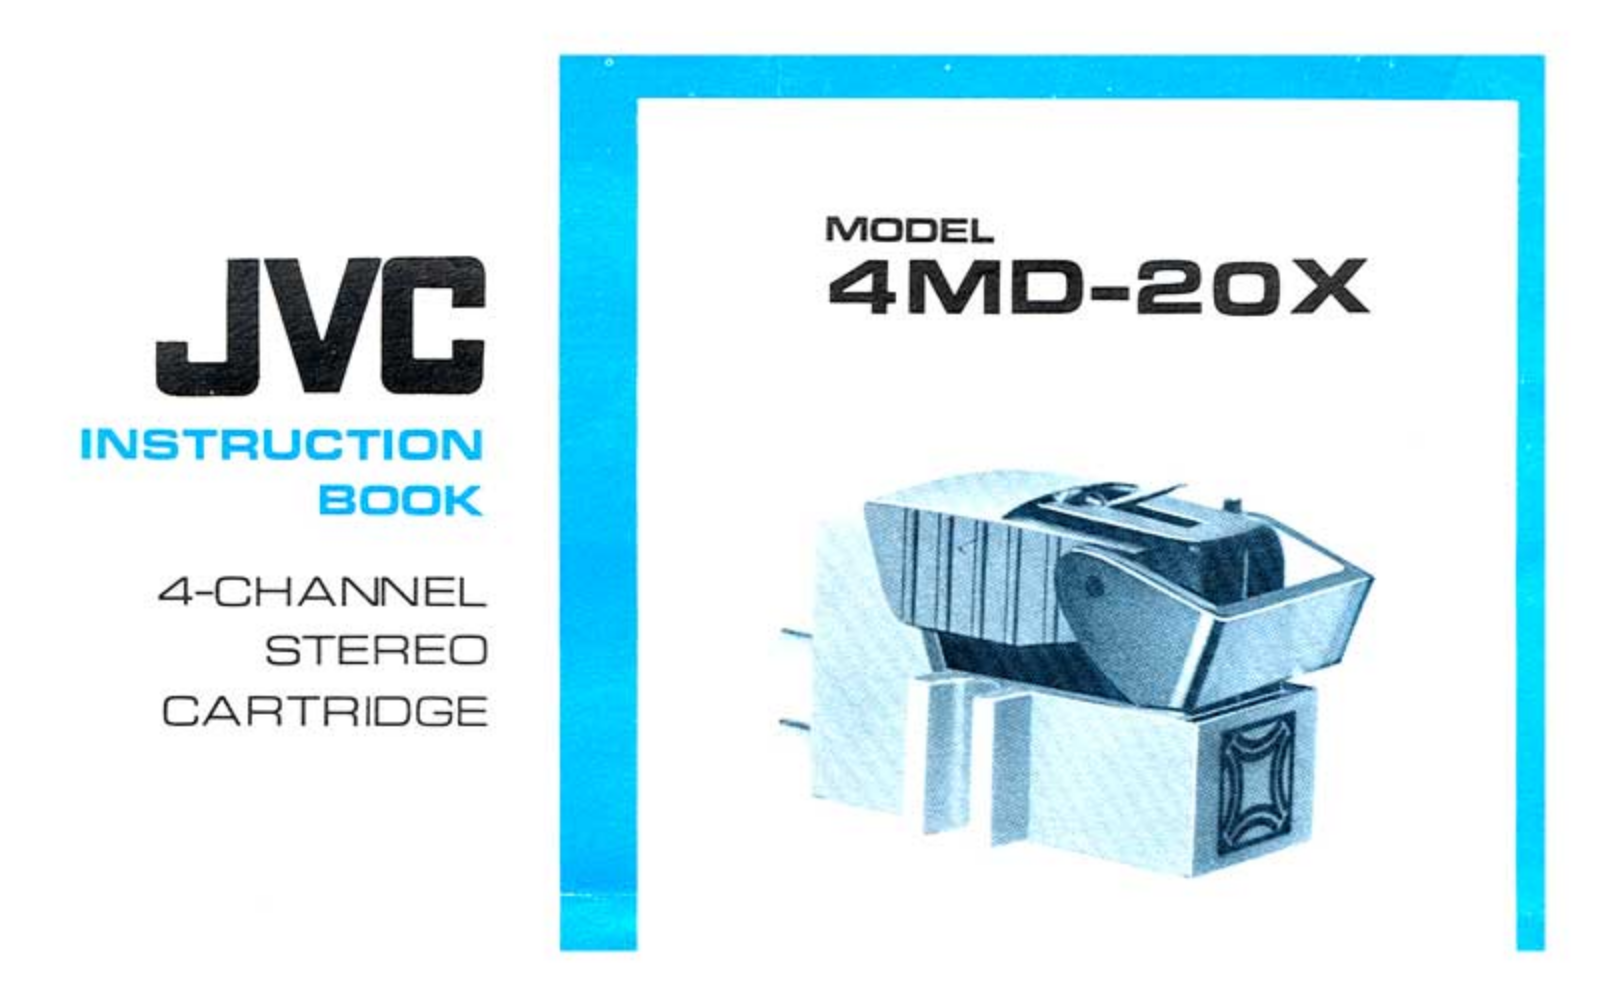 JVC 4-MD-20-X Owners manual